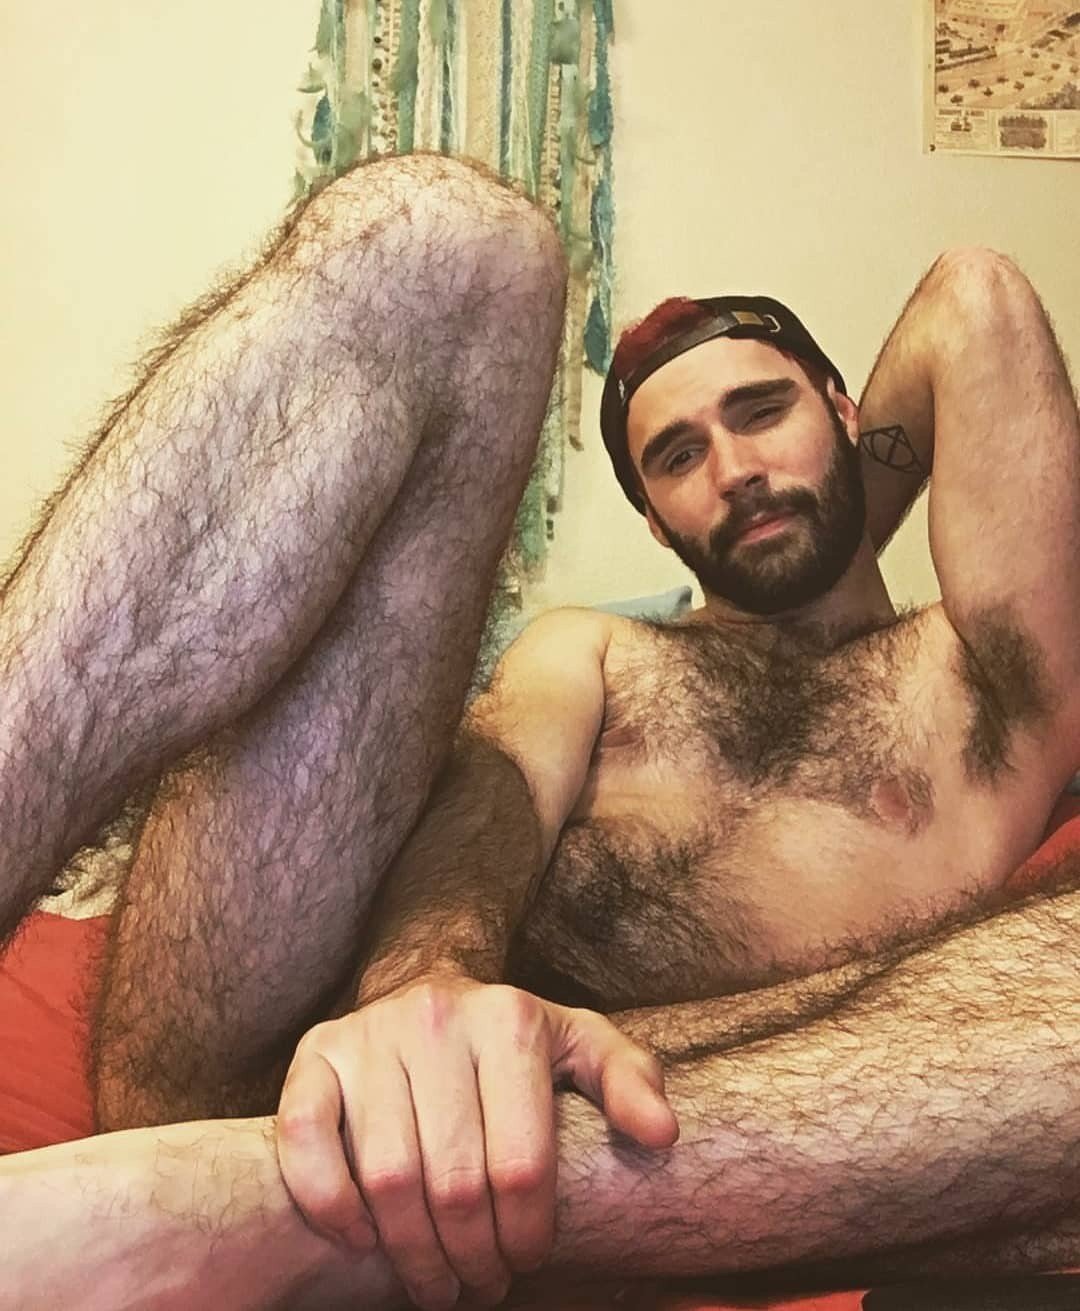 Photo by Smitty with the username @Resol702,  January 14, 2019 at 5:40 AM. The post is about the topic Gay Hairy Men